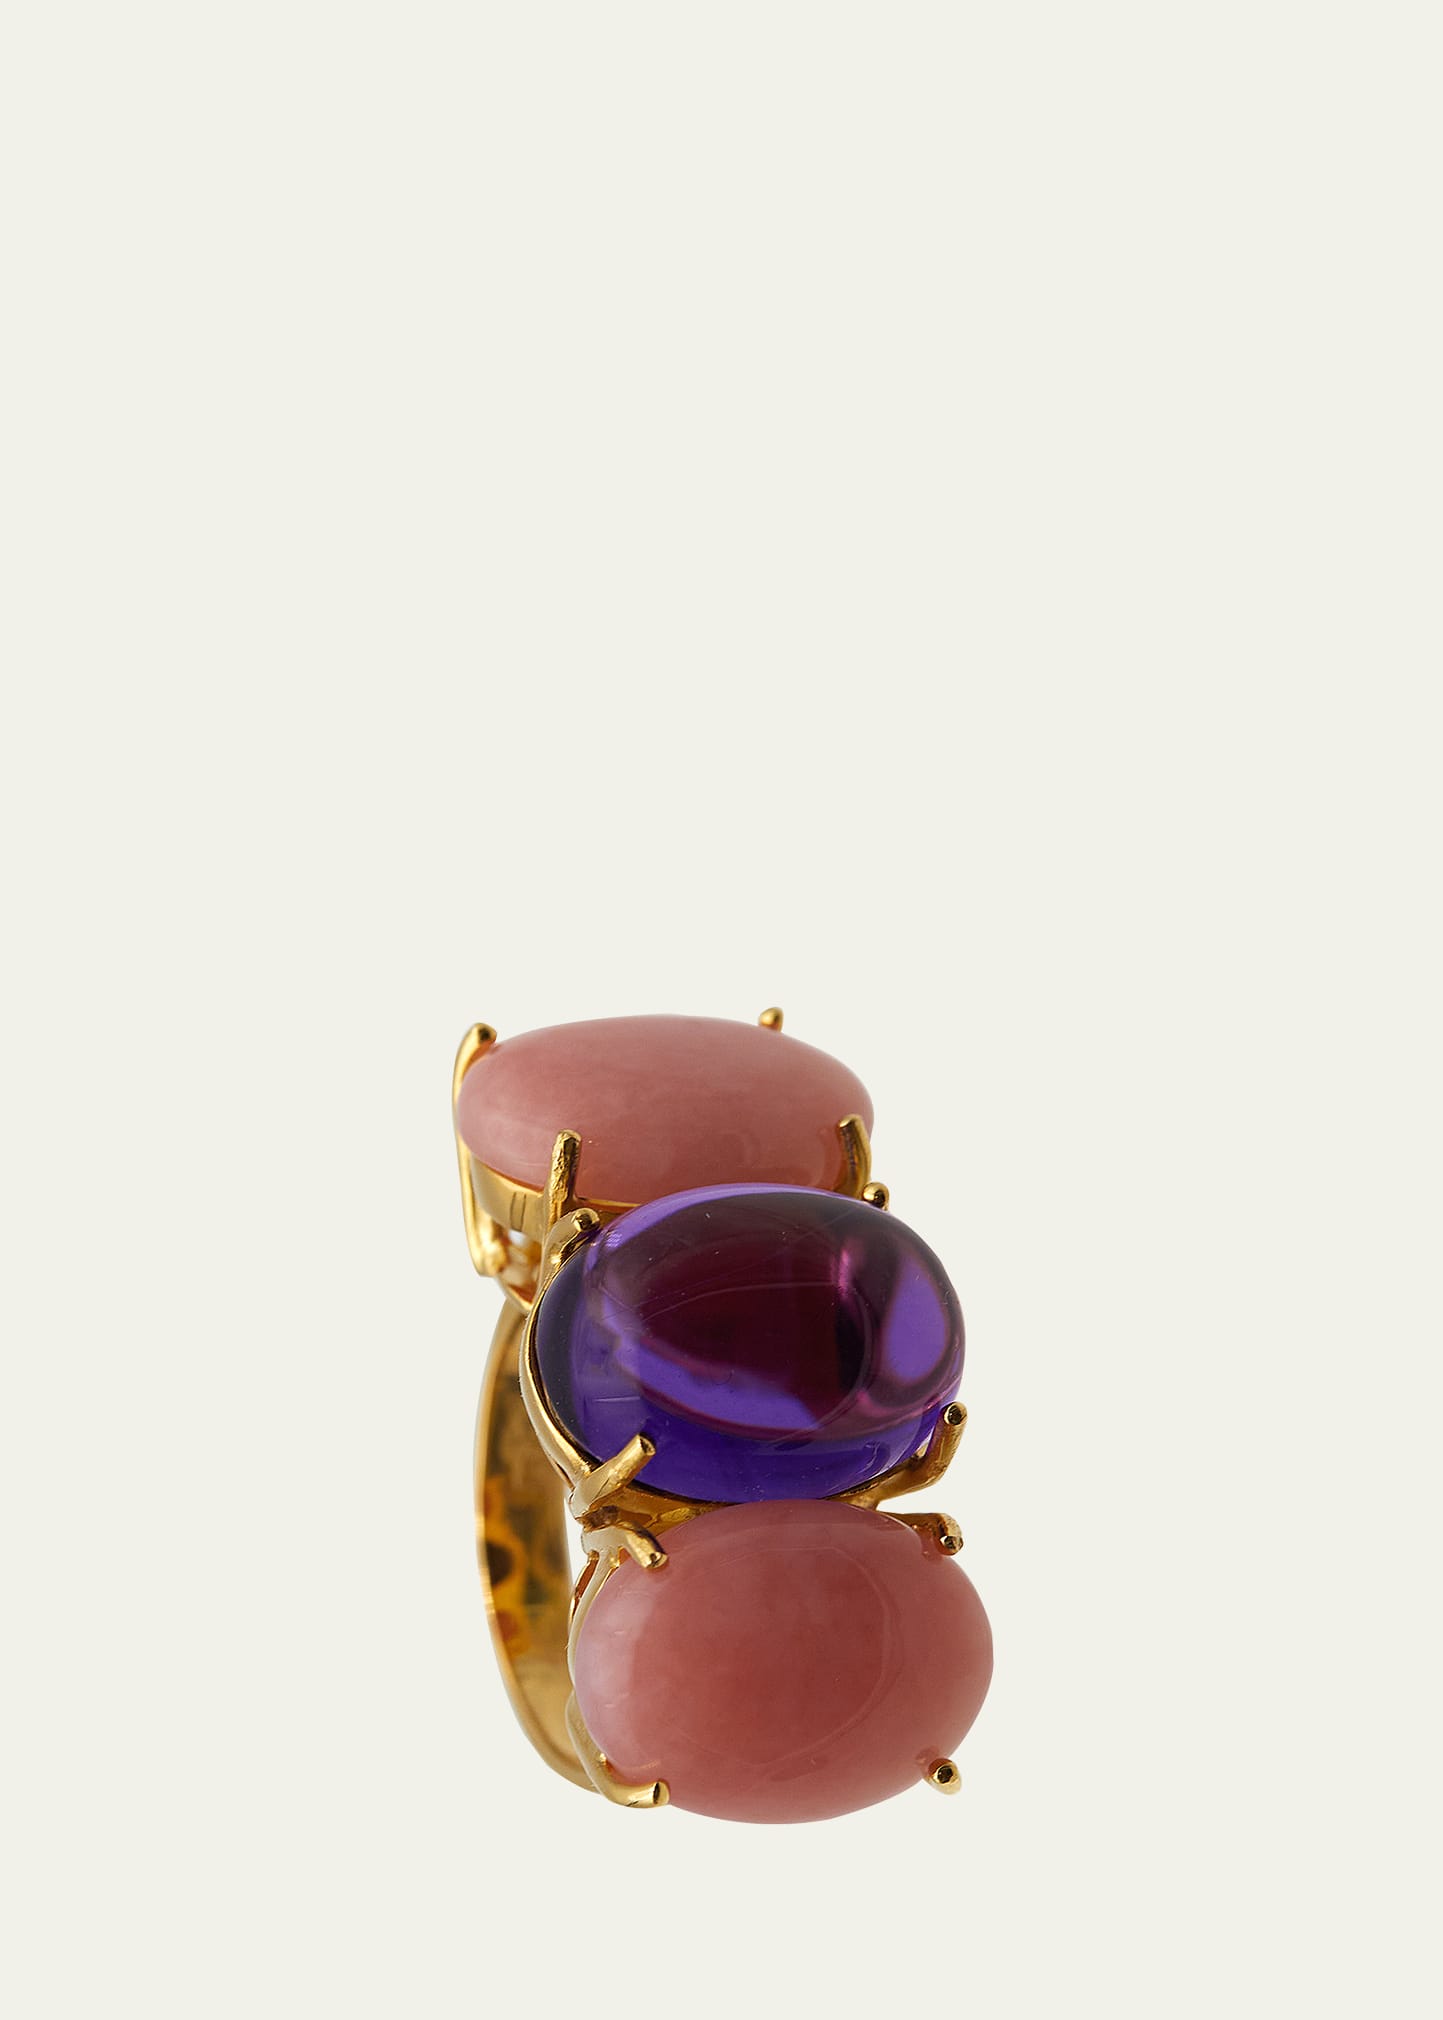 Grazia And Marica Vozza Trilogy Ring With Rhodonite And Amethyst In 18k Yellow Gold In Multi